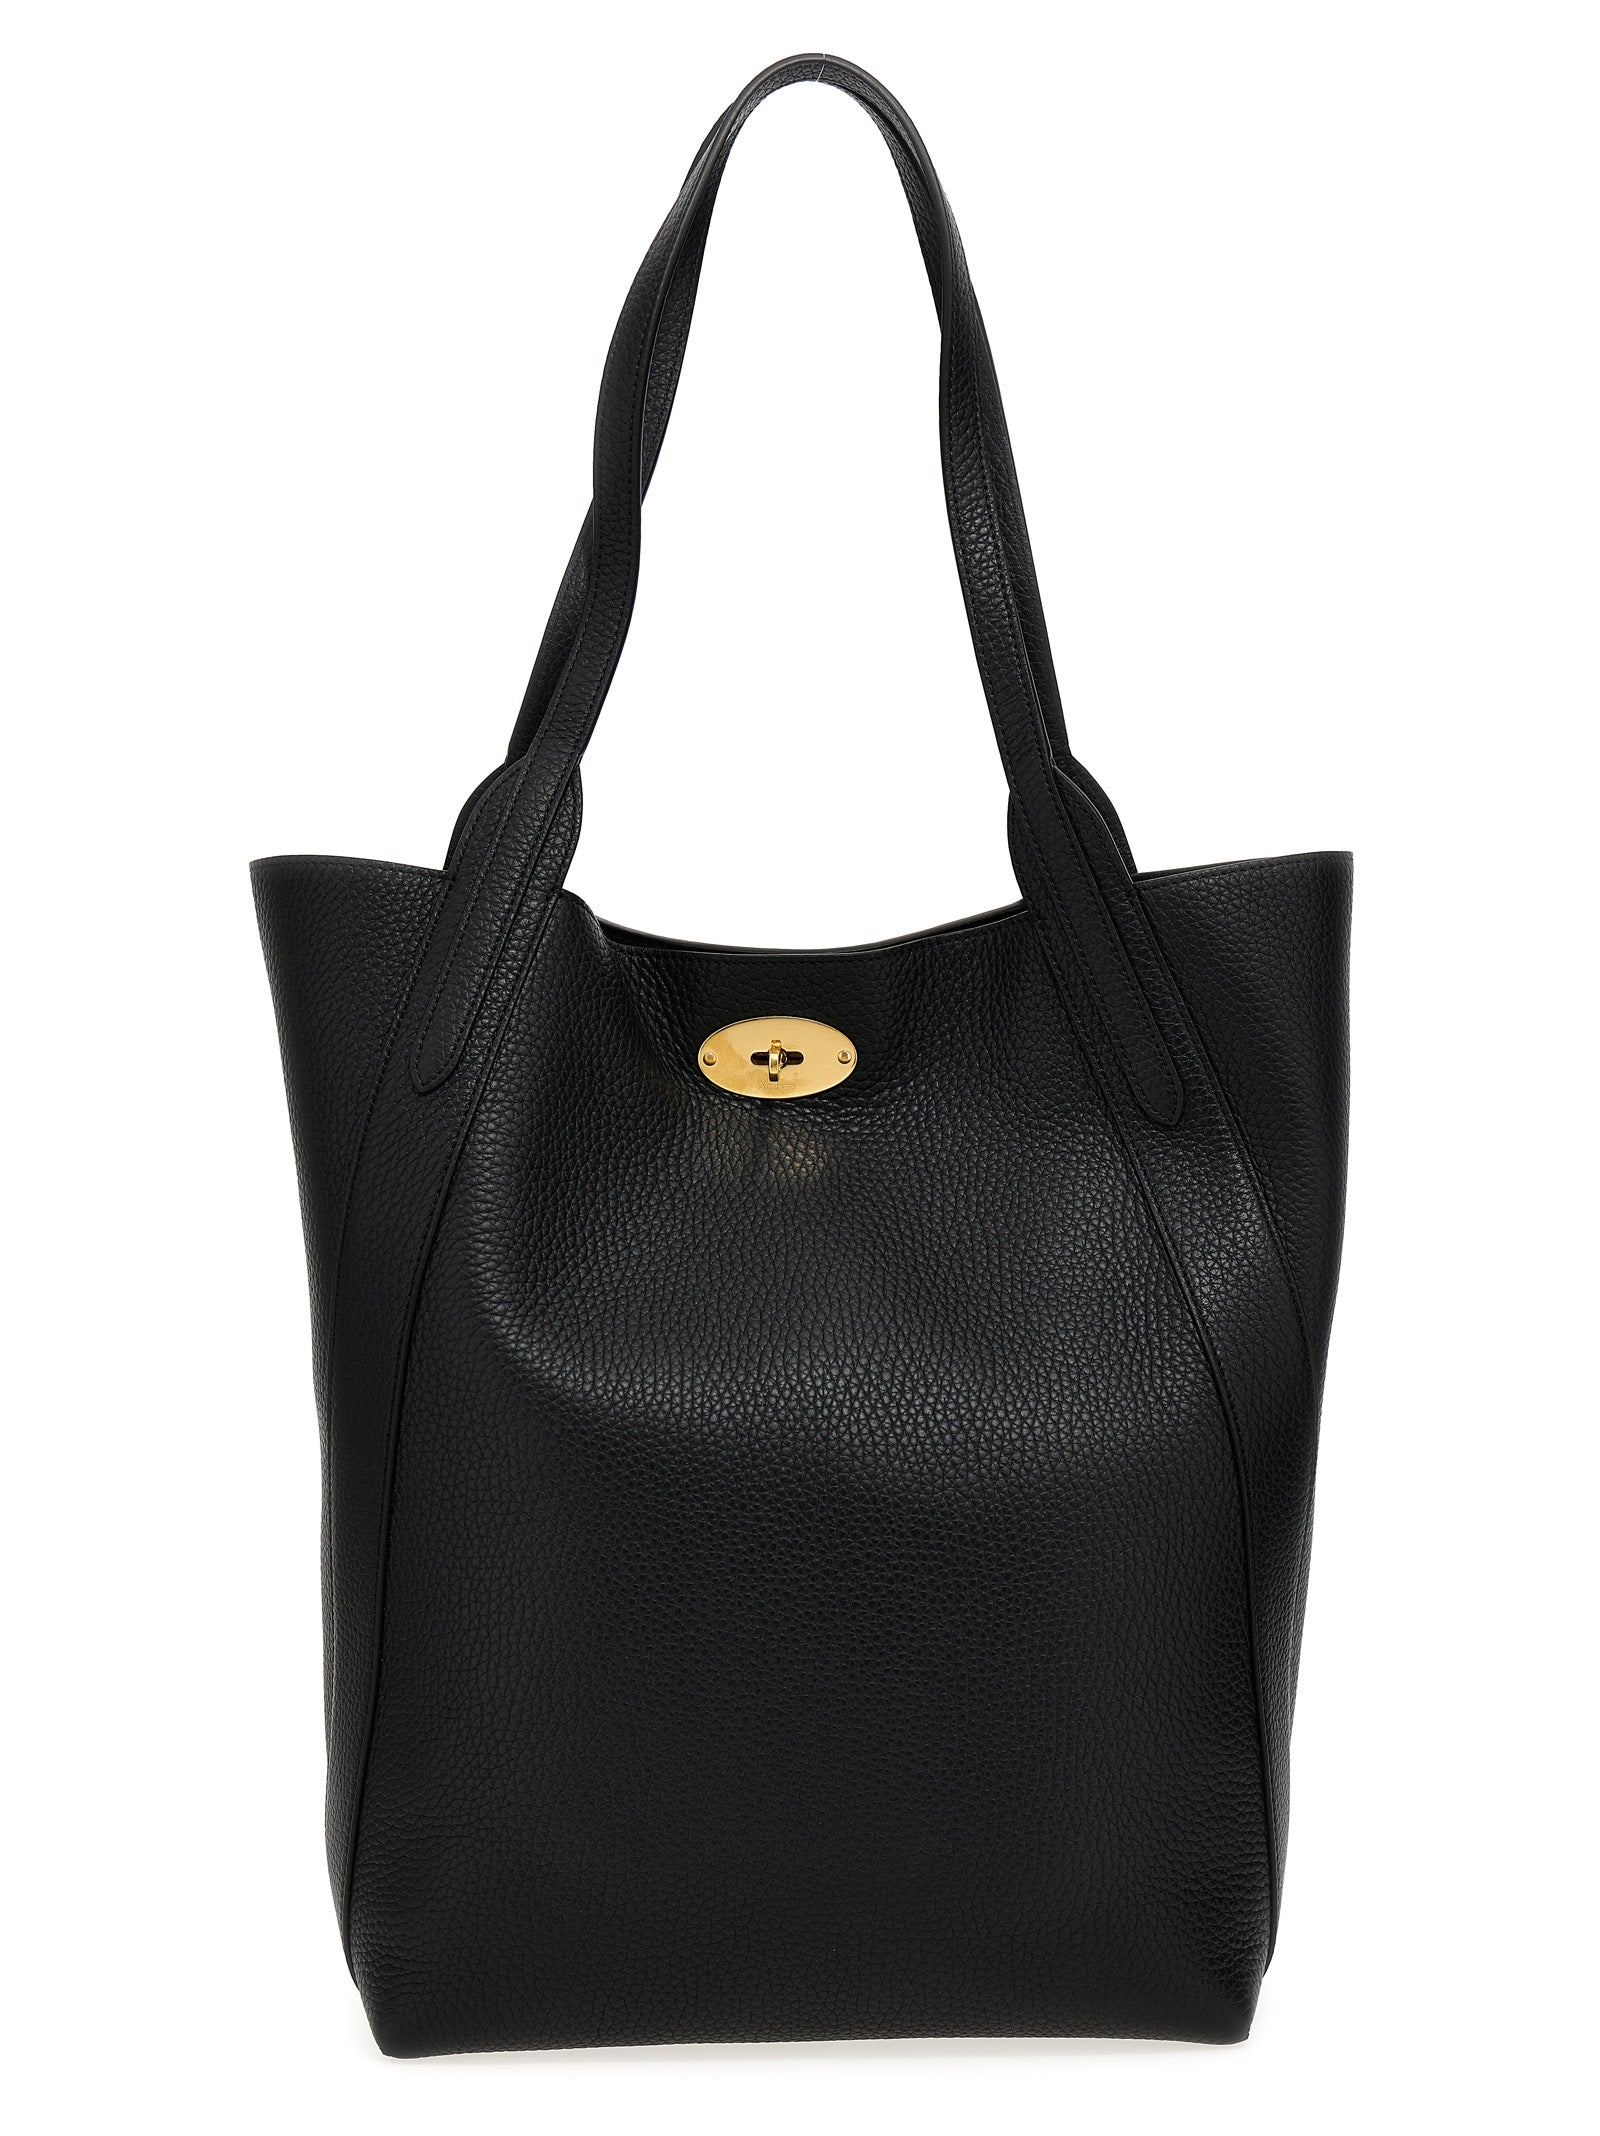 Mulberry North South Bayswater Shopper Tote Bag In Black